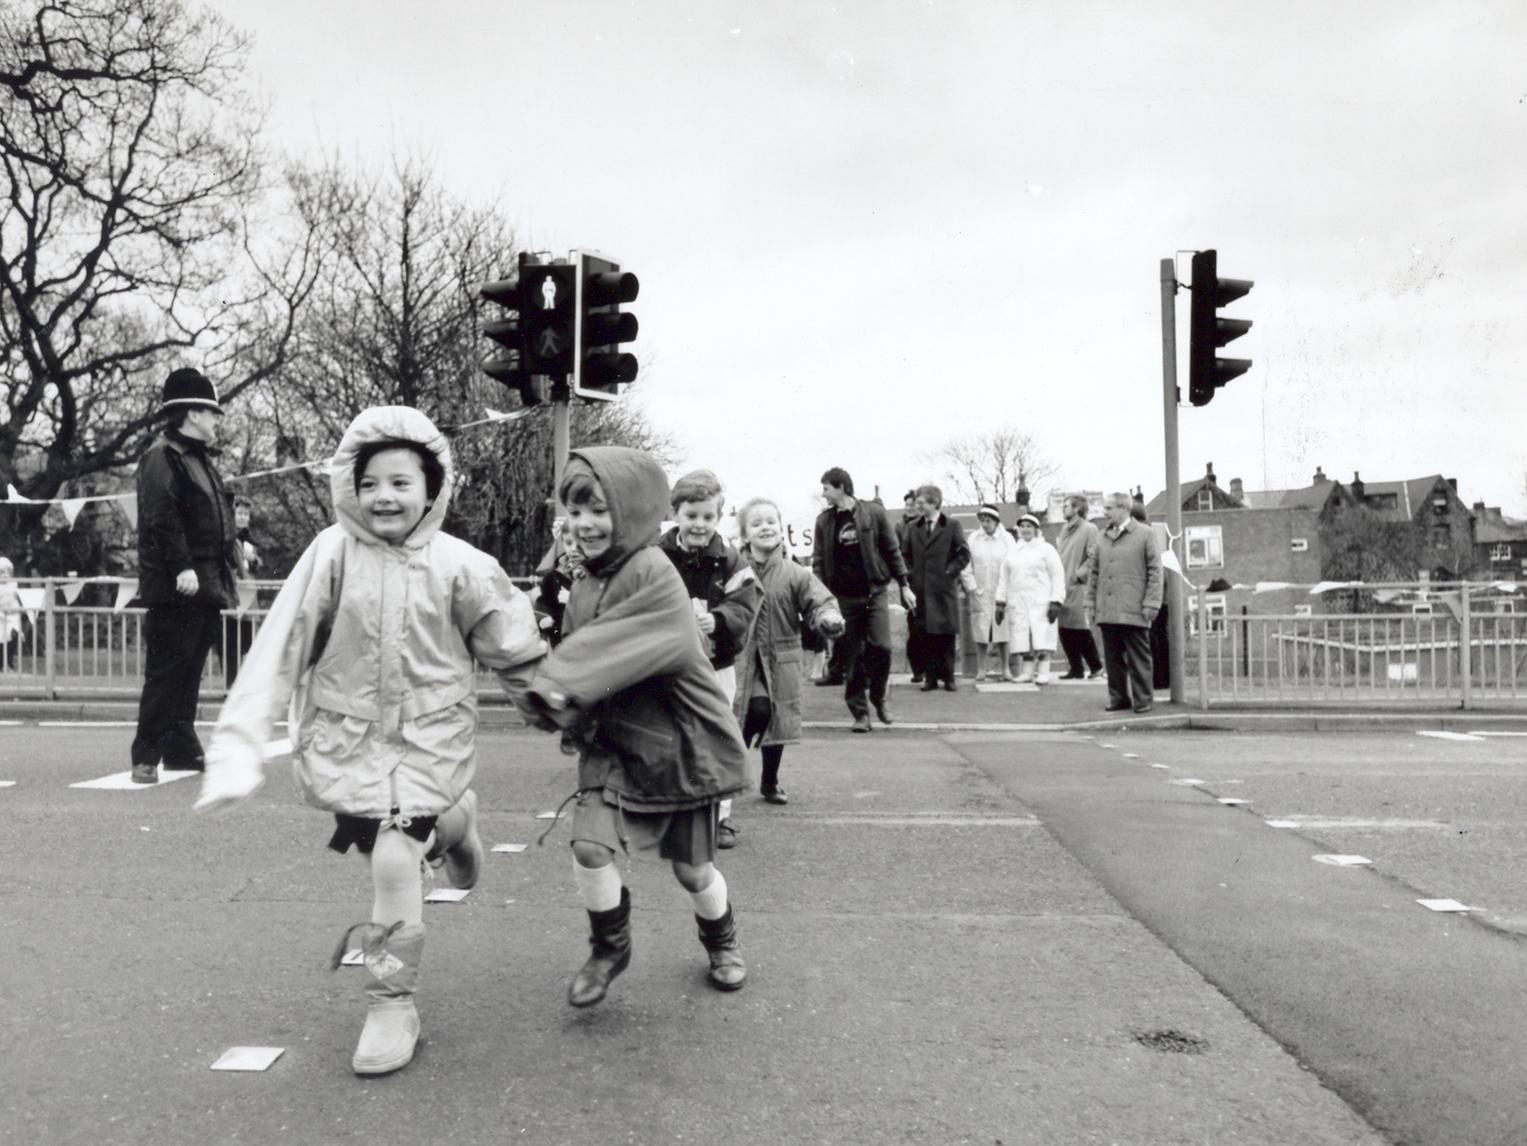 Children, parents and councillors braved a chilling wind to march across a new pelican crossing at the junction of Church Road and Church Lane - more than 20 years after a campaign was launched to get it